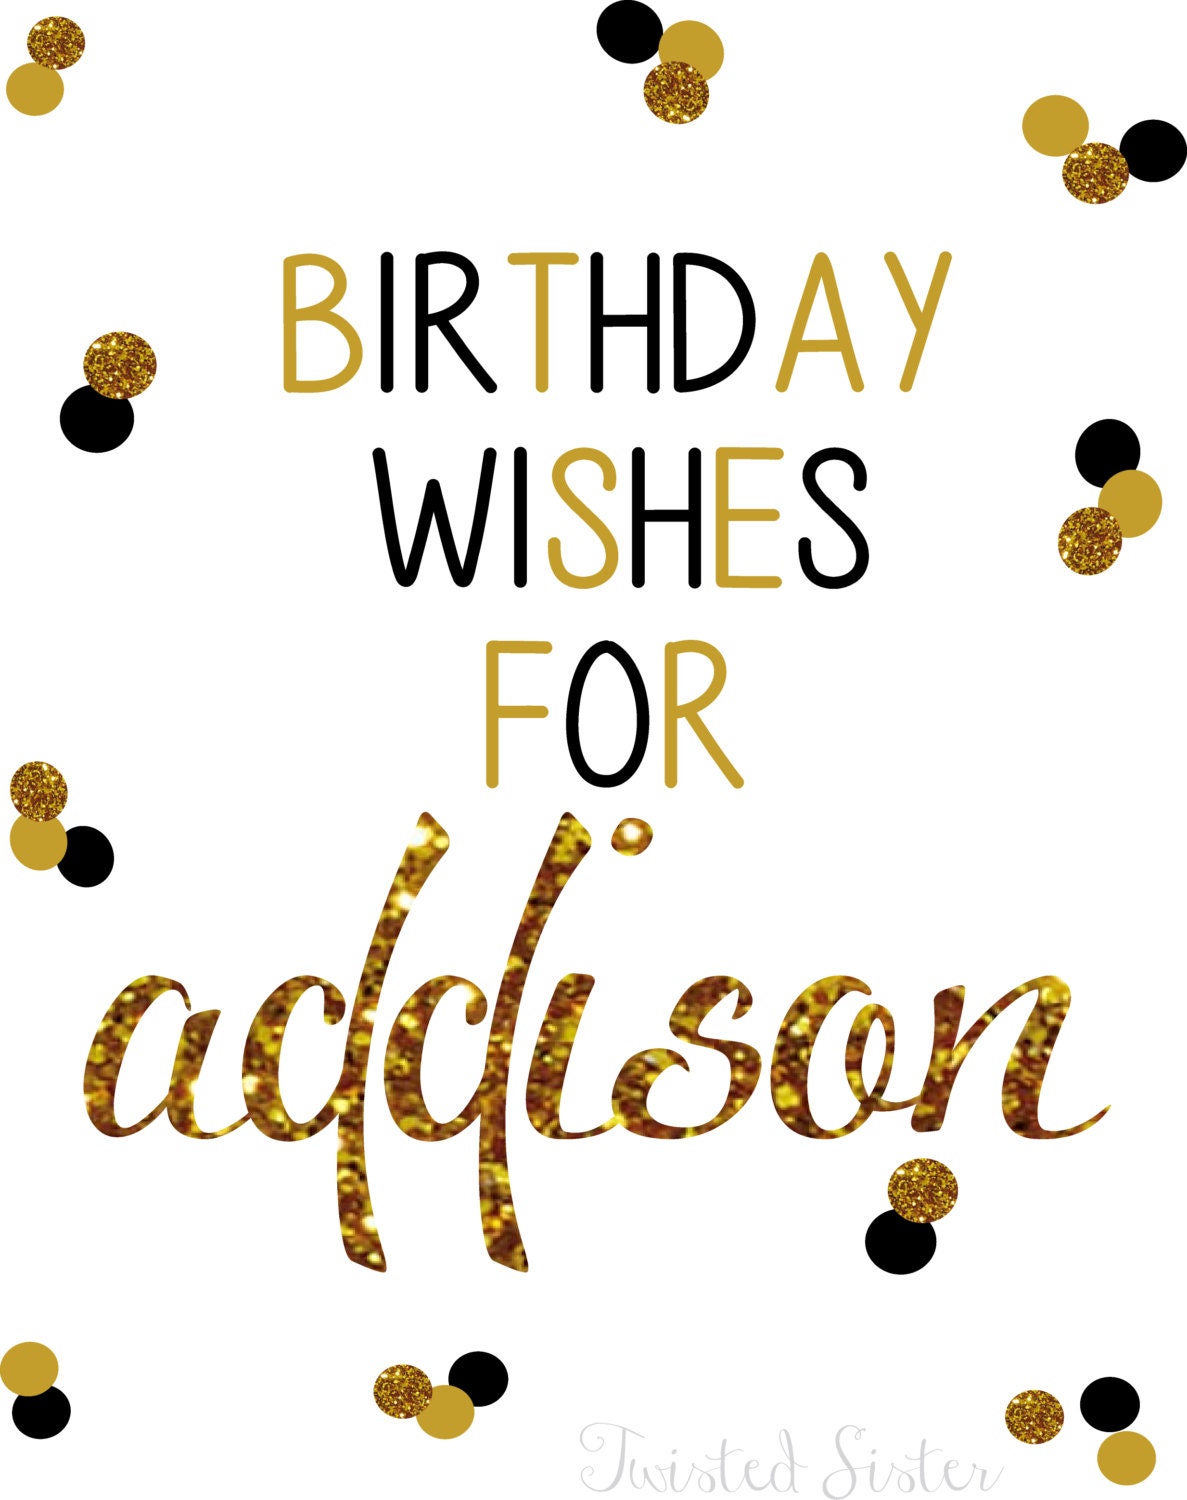 Birthday Wish Cards, Birthday Questions, Black & Gold Glitter, Birthday Party Wishes, Baby Shower Advice Card, Black and Gold Birthday Decor